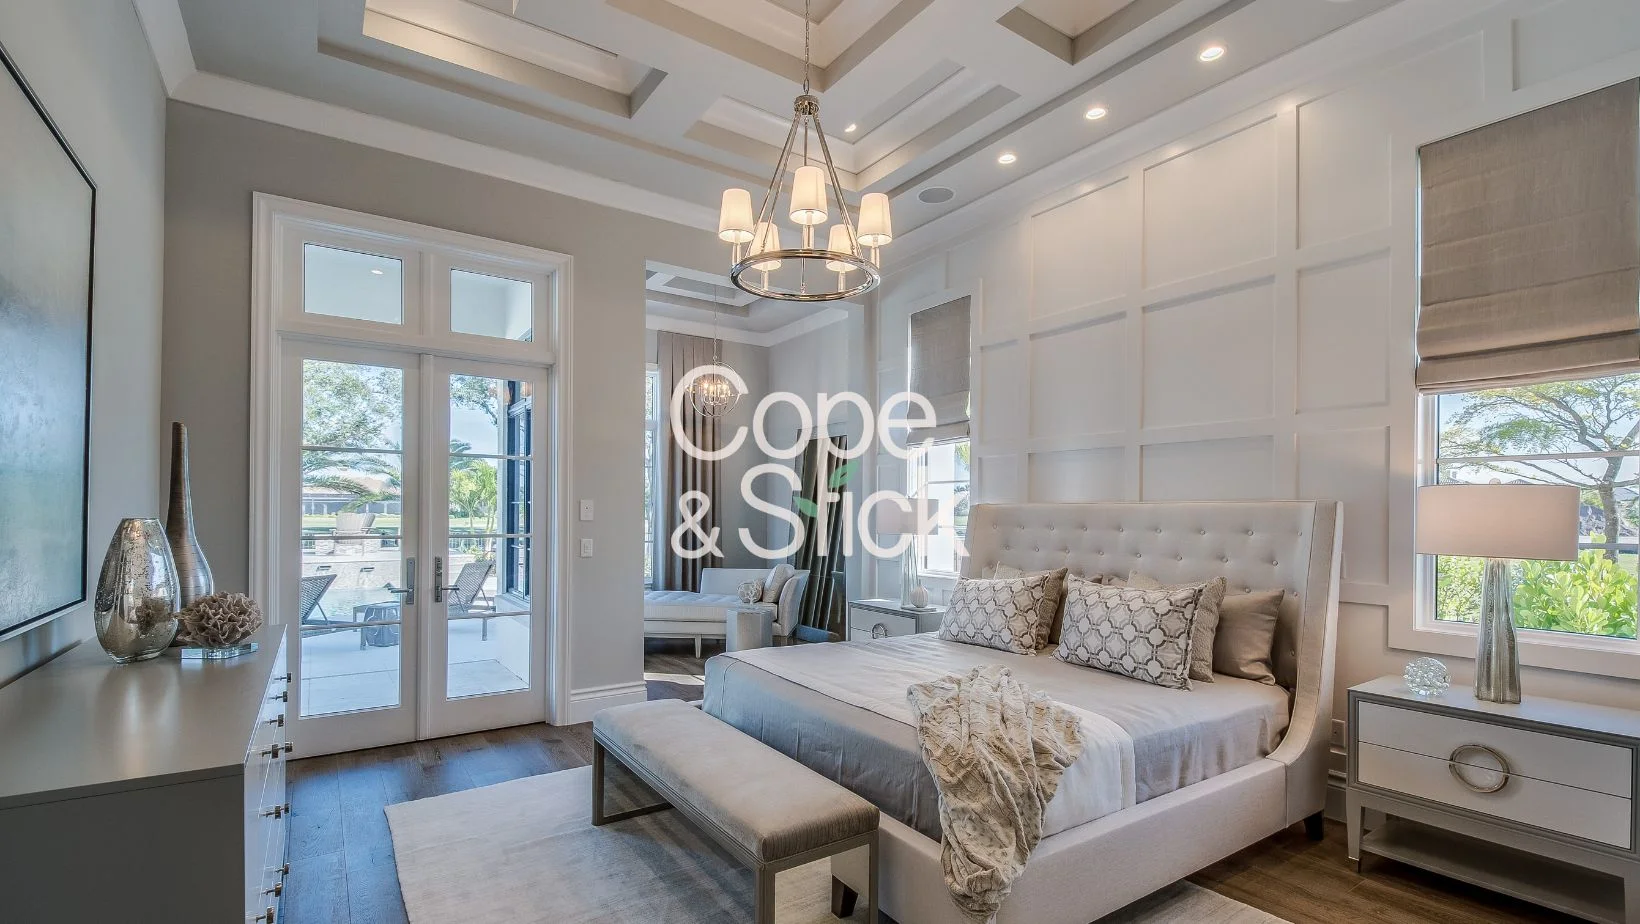 5 Inspiring Coffered Ceiling Ideas to Redefine Your Space